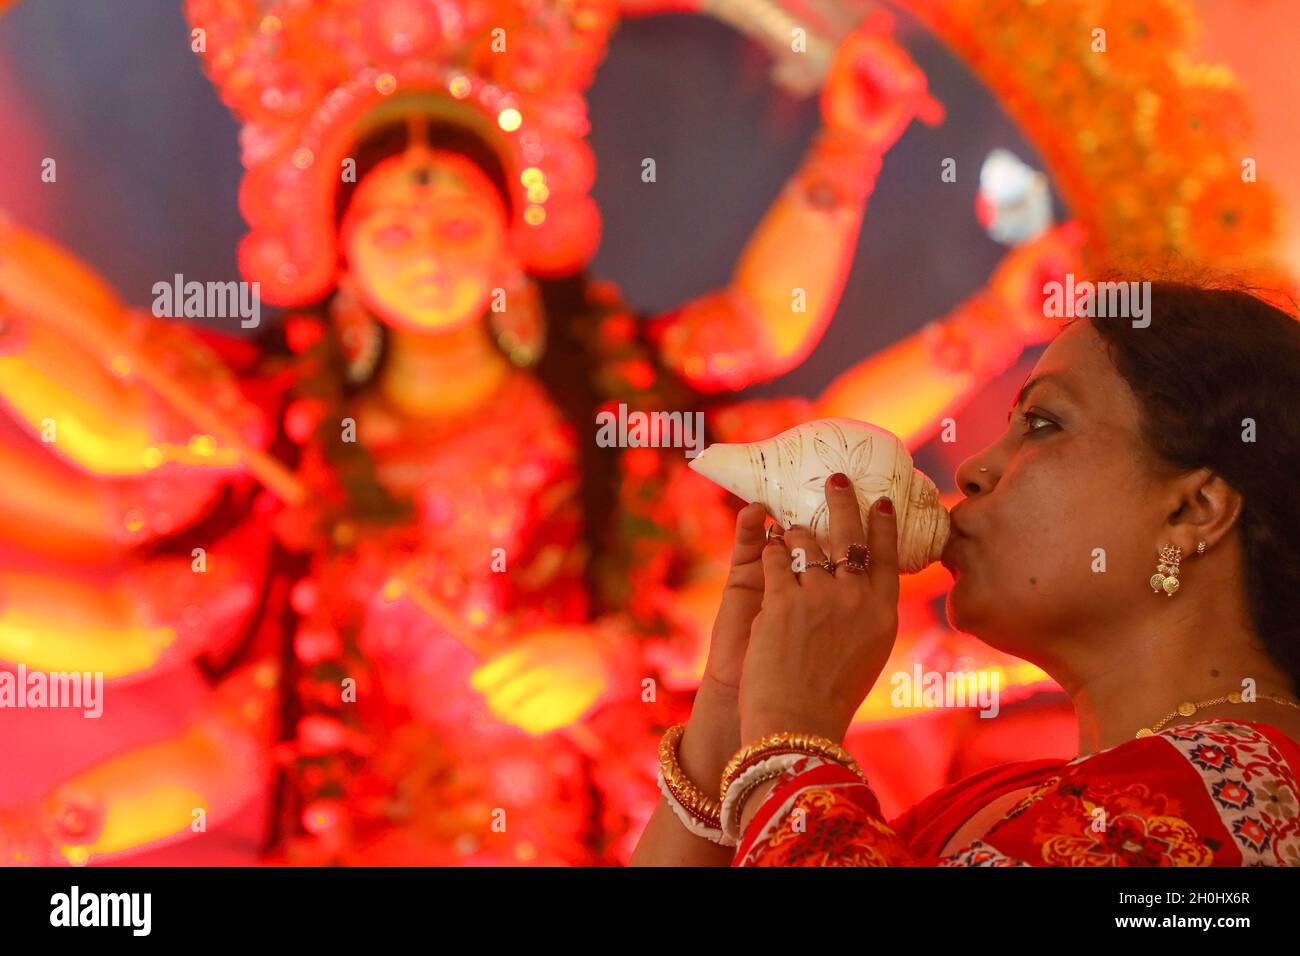 Dhaka, Bangladesh. 12th Oct, 2021. A Hindu Devotee seen blowing conch shells to Goddess Durga, during the festival.7th day of Durga puja festival known as Saptami, the biggest Hindu festival running for 9 days all over Bangladesh. Credit: SOPA Images Limited/Alamy Live News Stock Photo